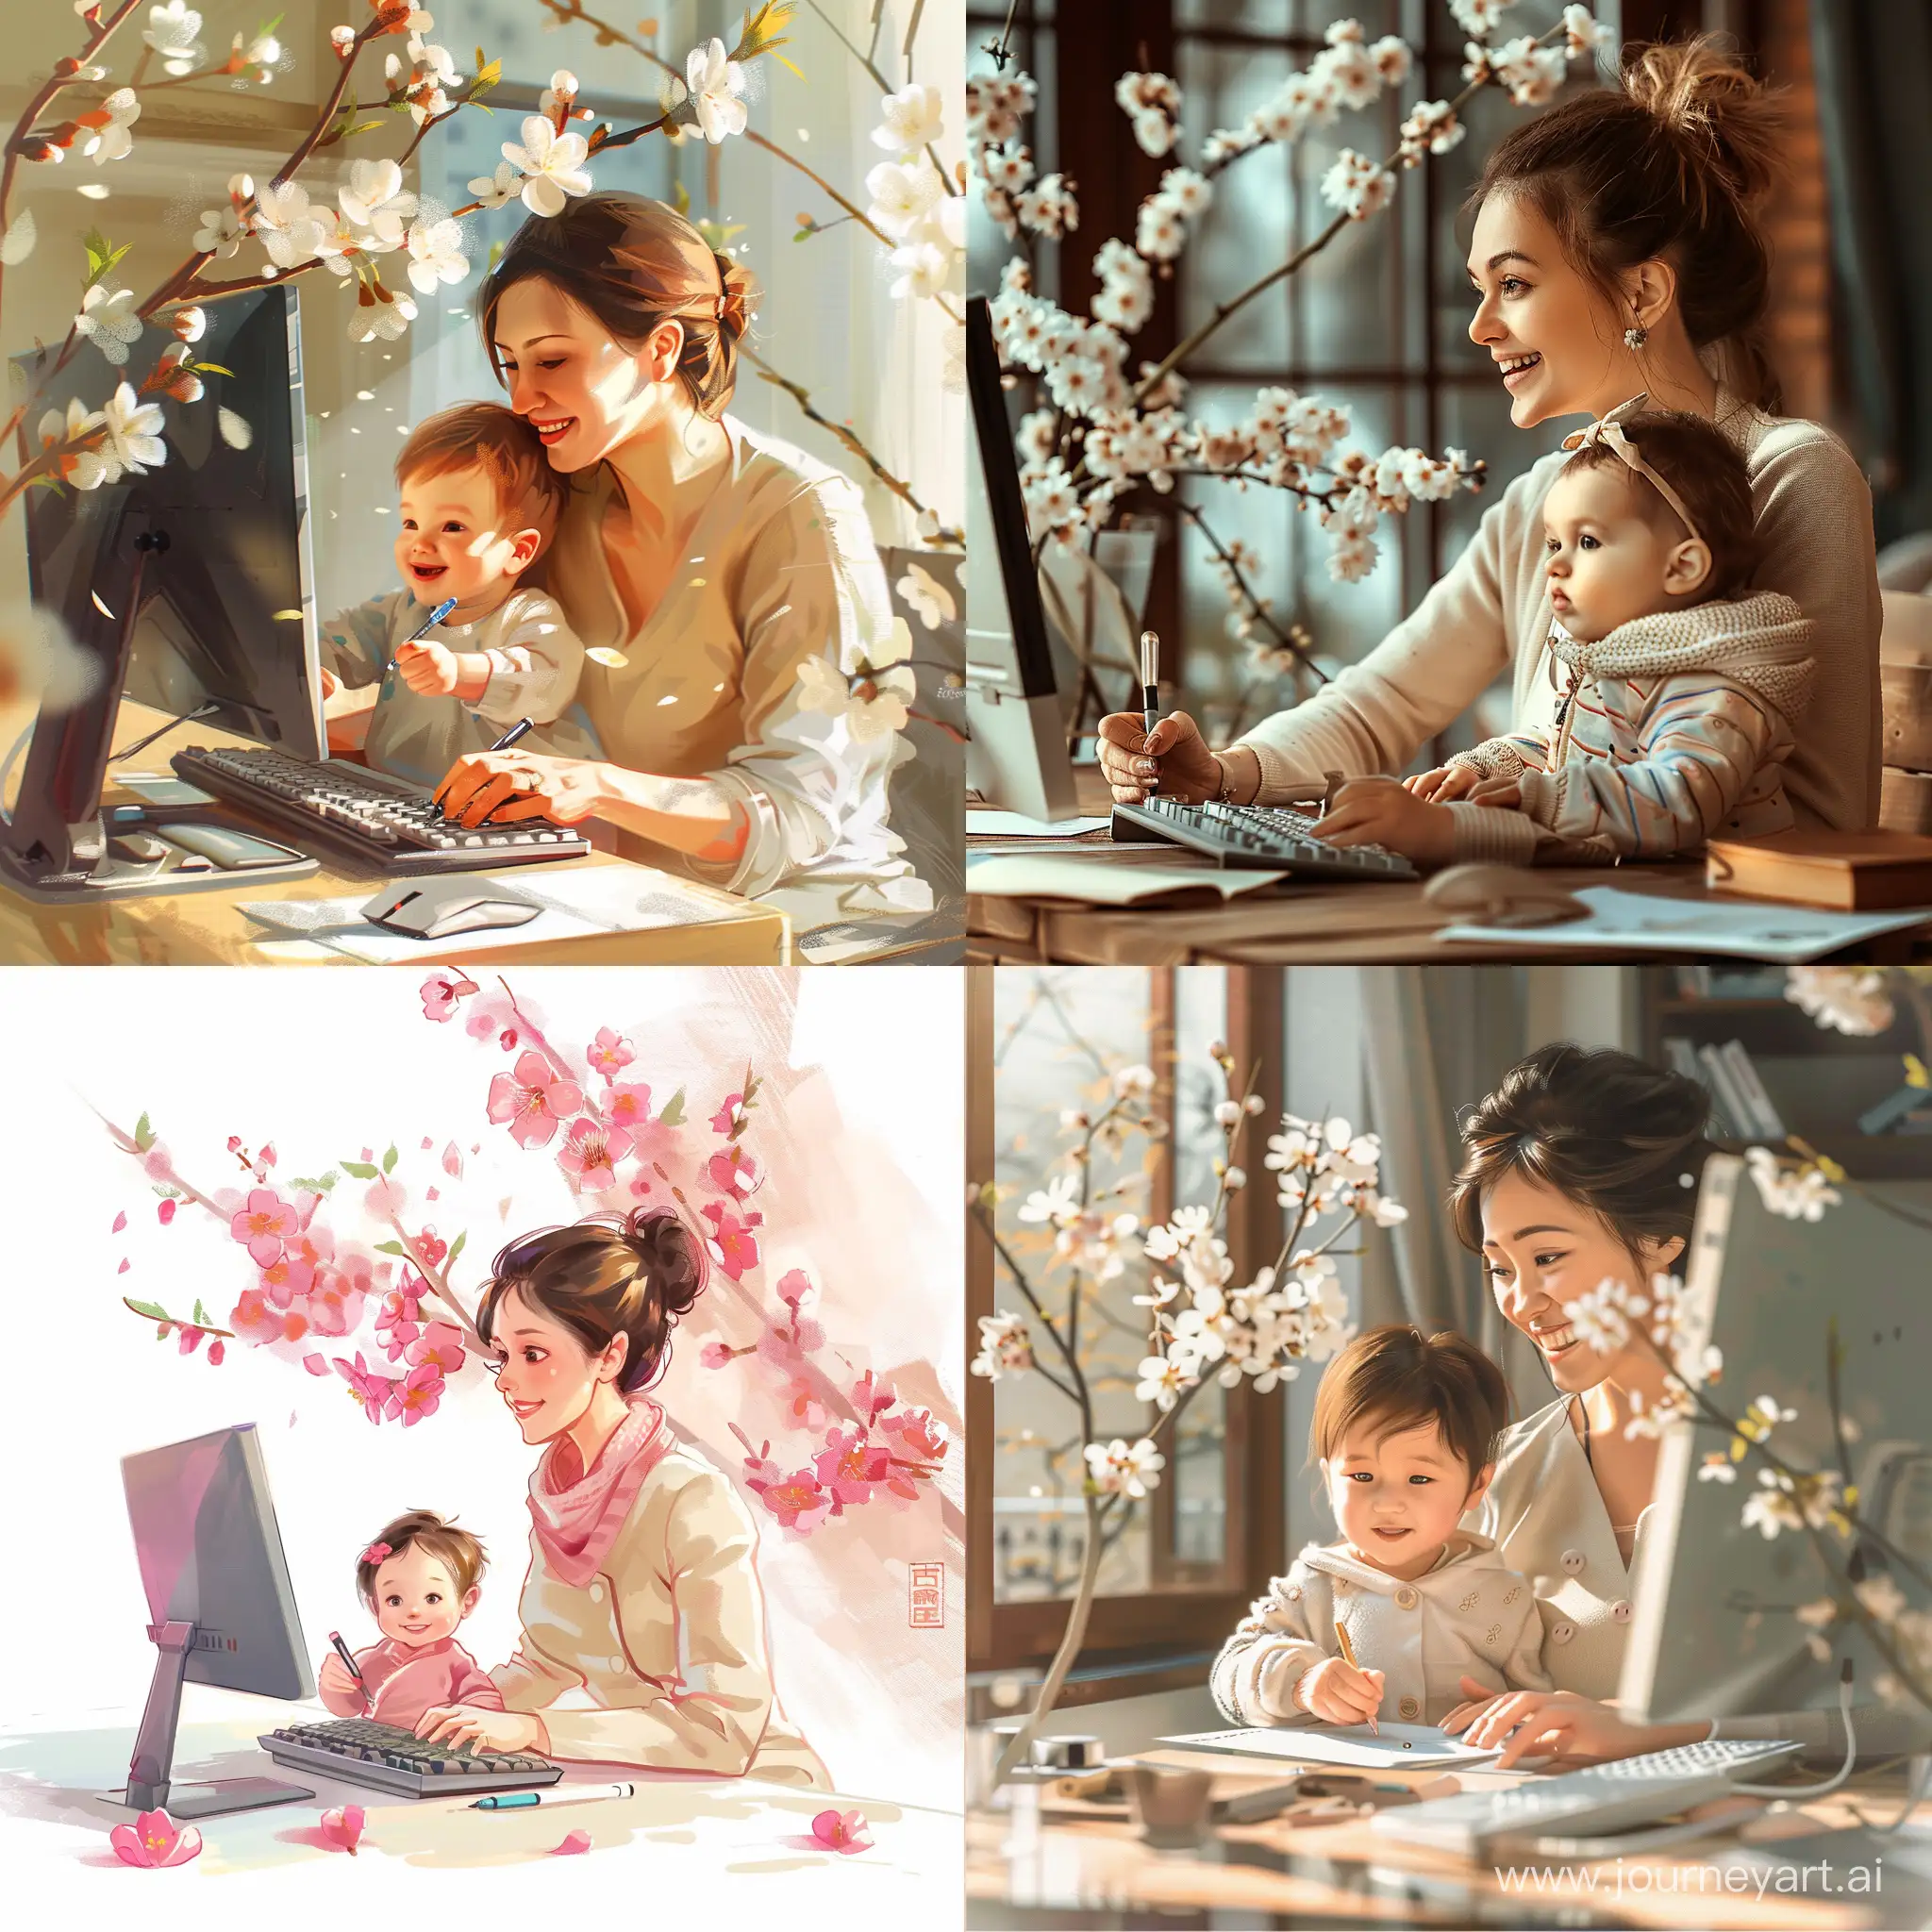 create a picture "a mother with a small child is sitting at a computer and writing something enthusiastically", the image format for the Yandex zen channel, bright blossoms, the picture is as realistic as possible